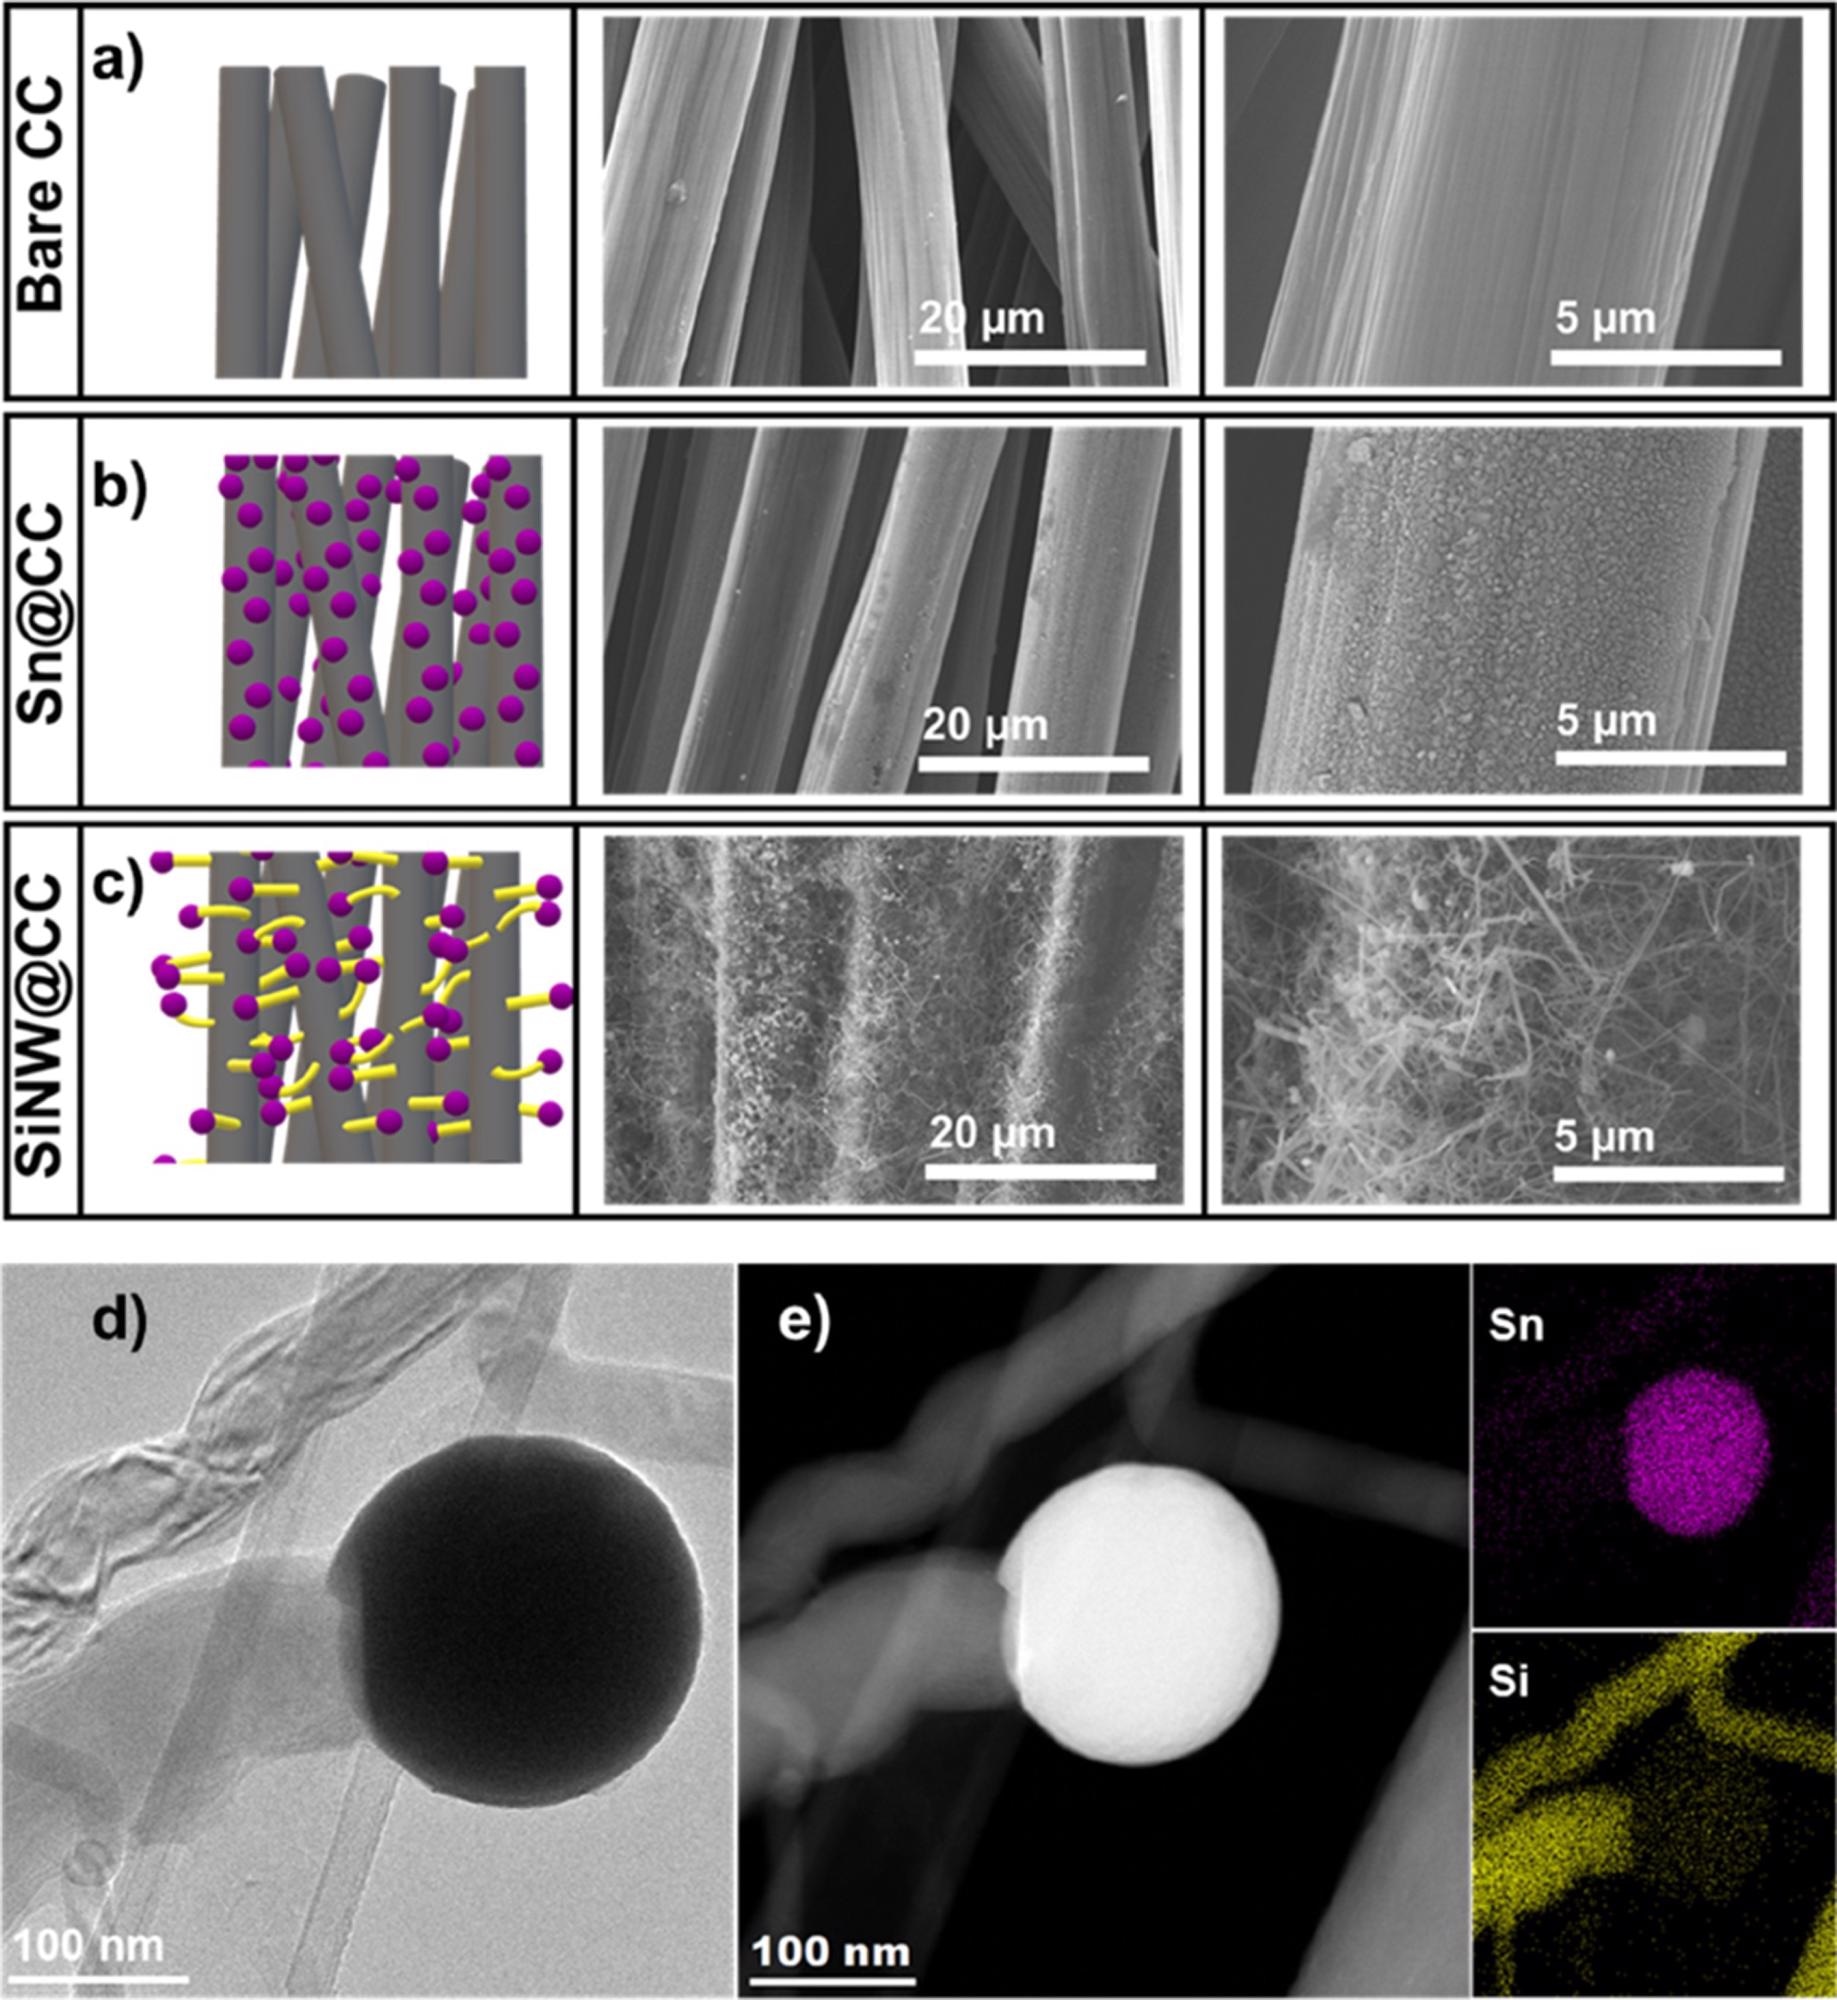 Schematic and SEM images of a) bare CC, b) Sn coated CC and c) SiNW coated CC. d) TEM and e) STEM image of a Sn seeded SiNW with corresponding Sn and Si EDS elemental maps.